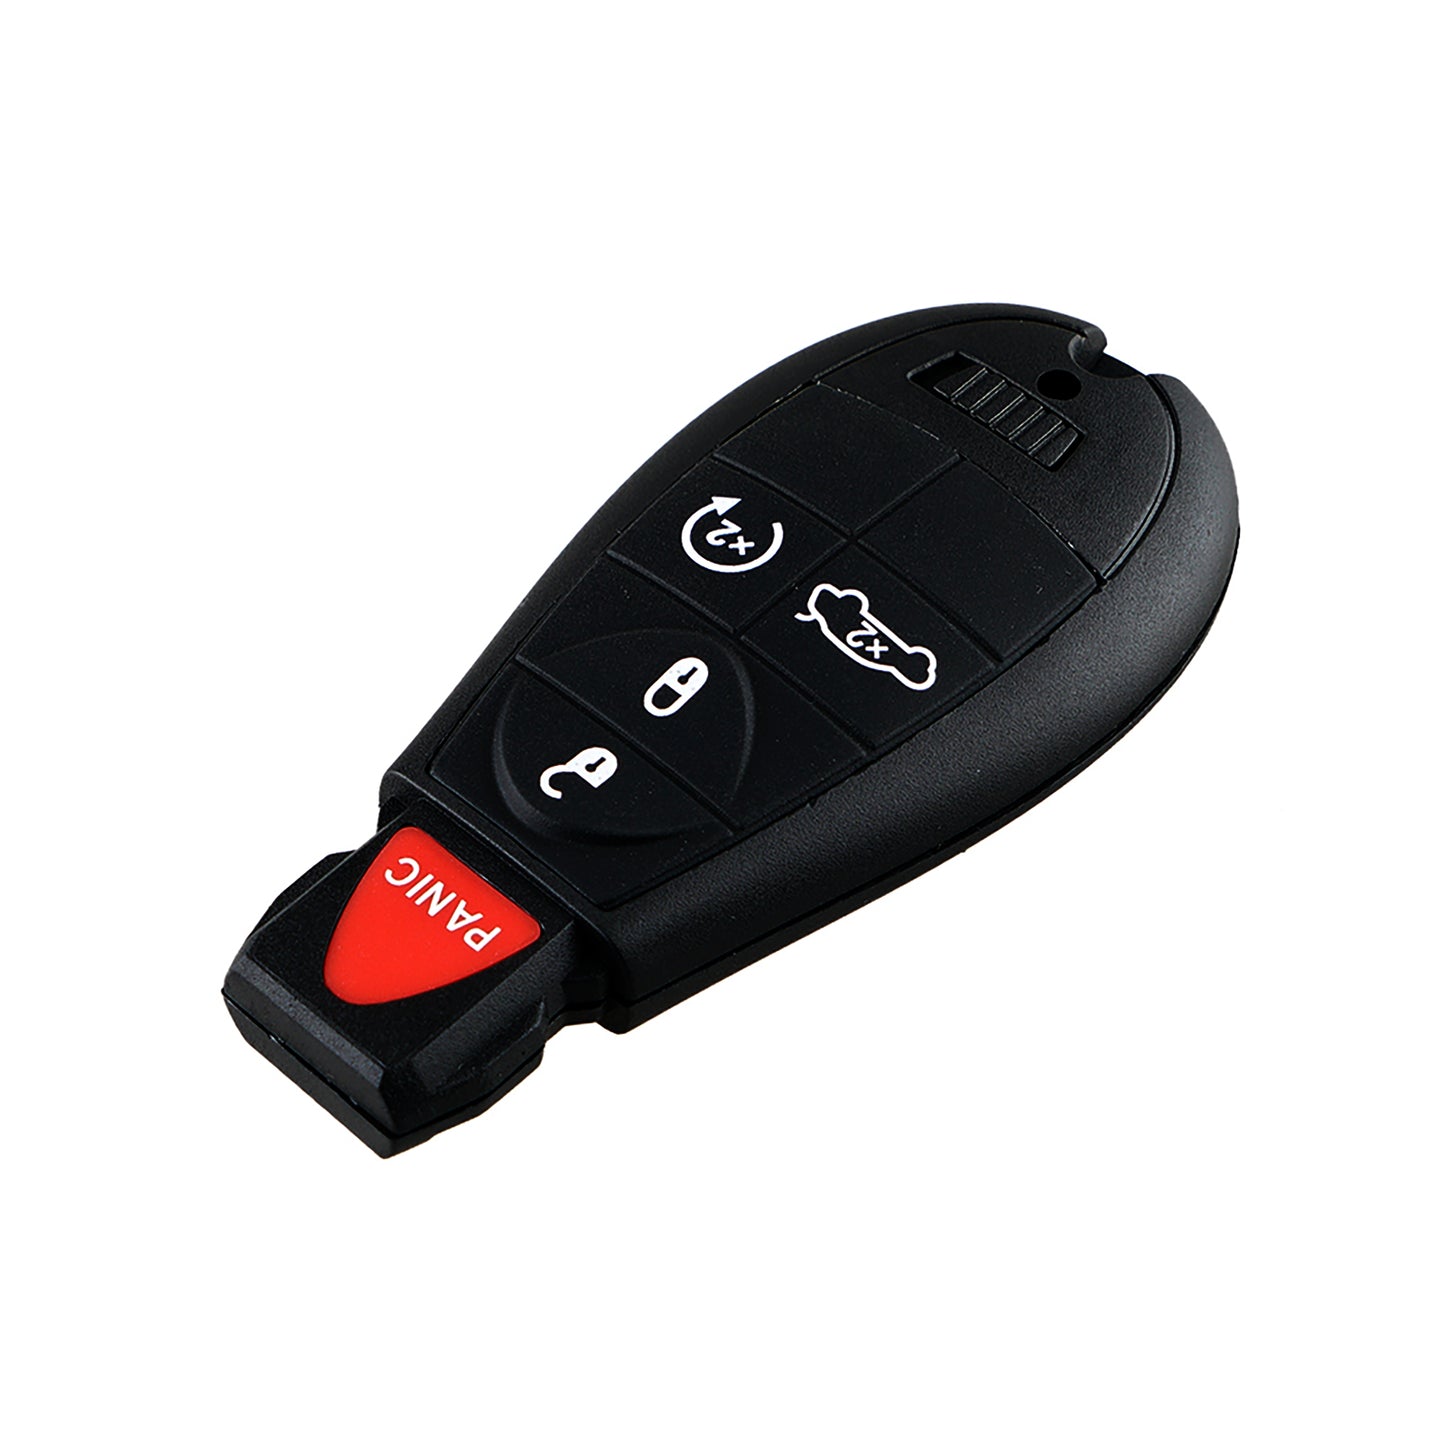 5 Buttons 433MHz Keyless Entry Fob Remote Car Key For2008-2014 Dodge Charger Magnum Challenger 2008-2013 Jeep Grand Cherokee 2008-2011 Chrysler 300 FCC ID: M3N5WY783X IYZ-C01C SKU : J025